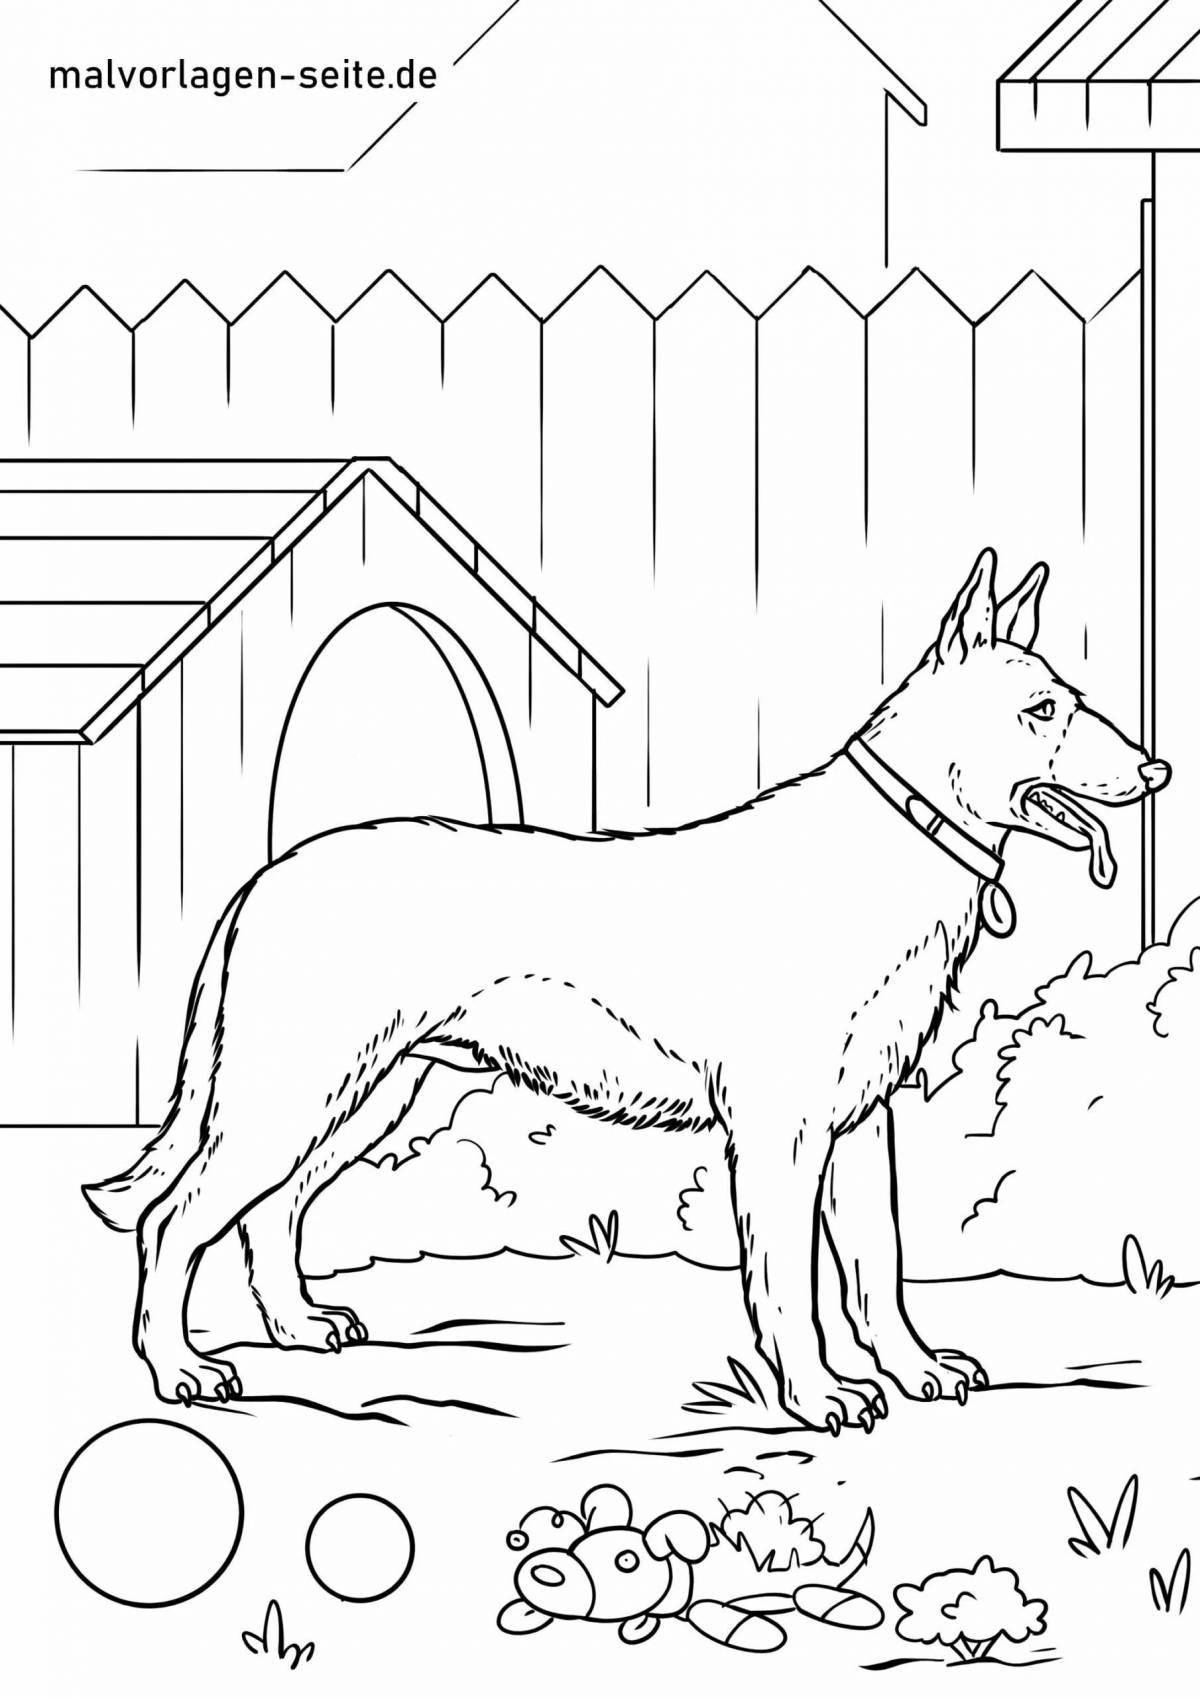 Cute service dogs coloring pages for kids